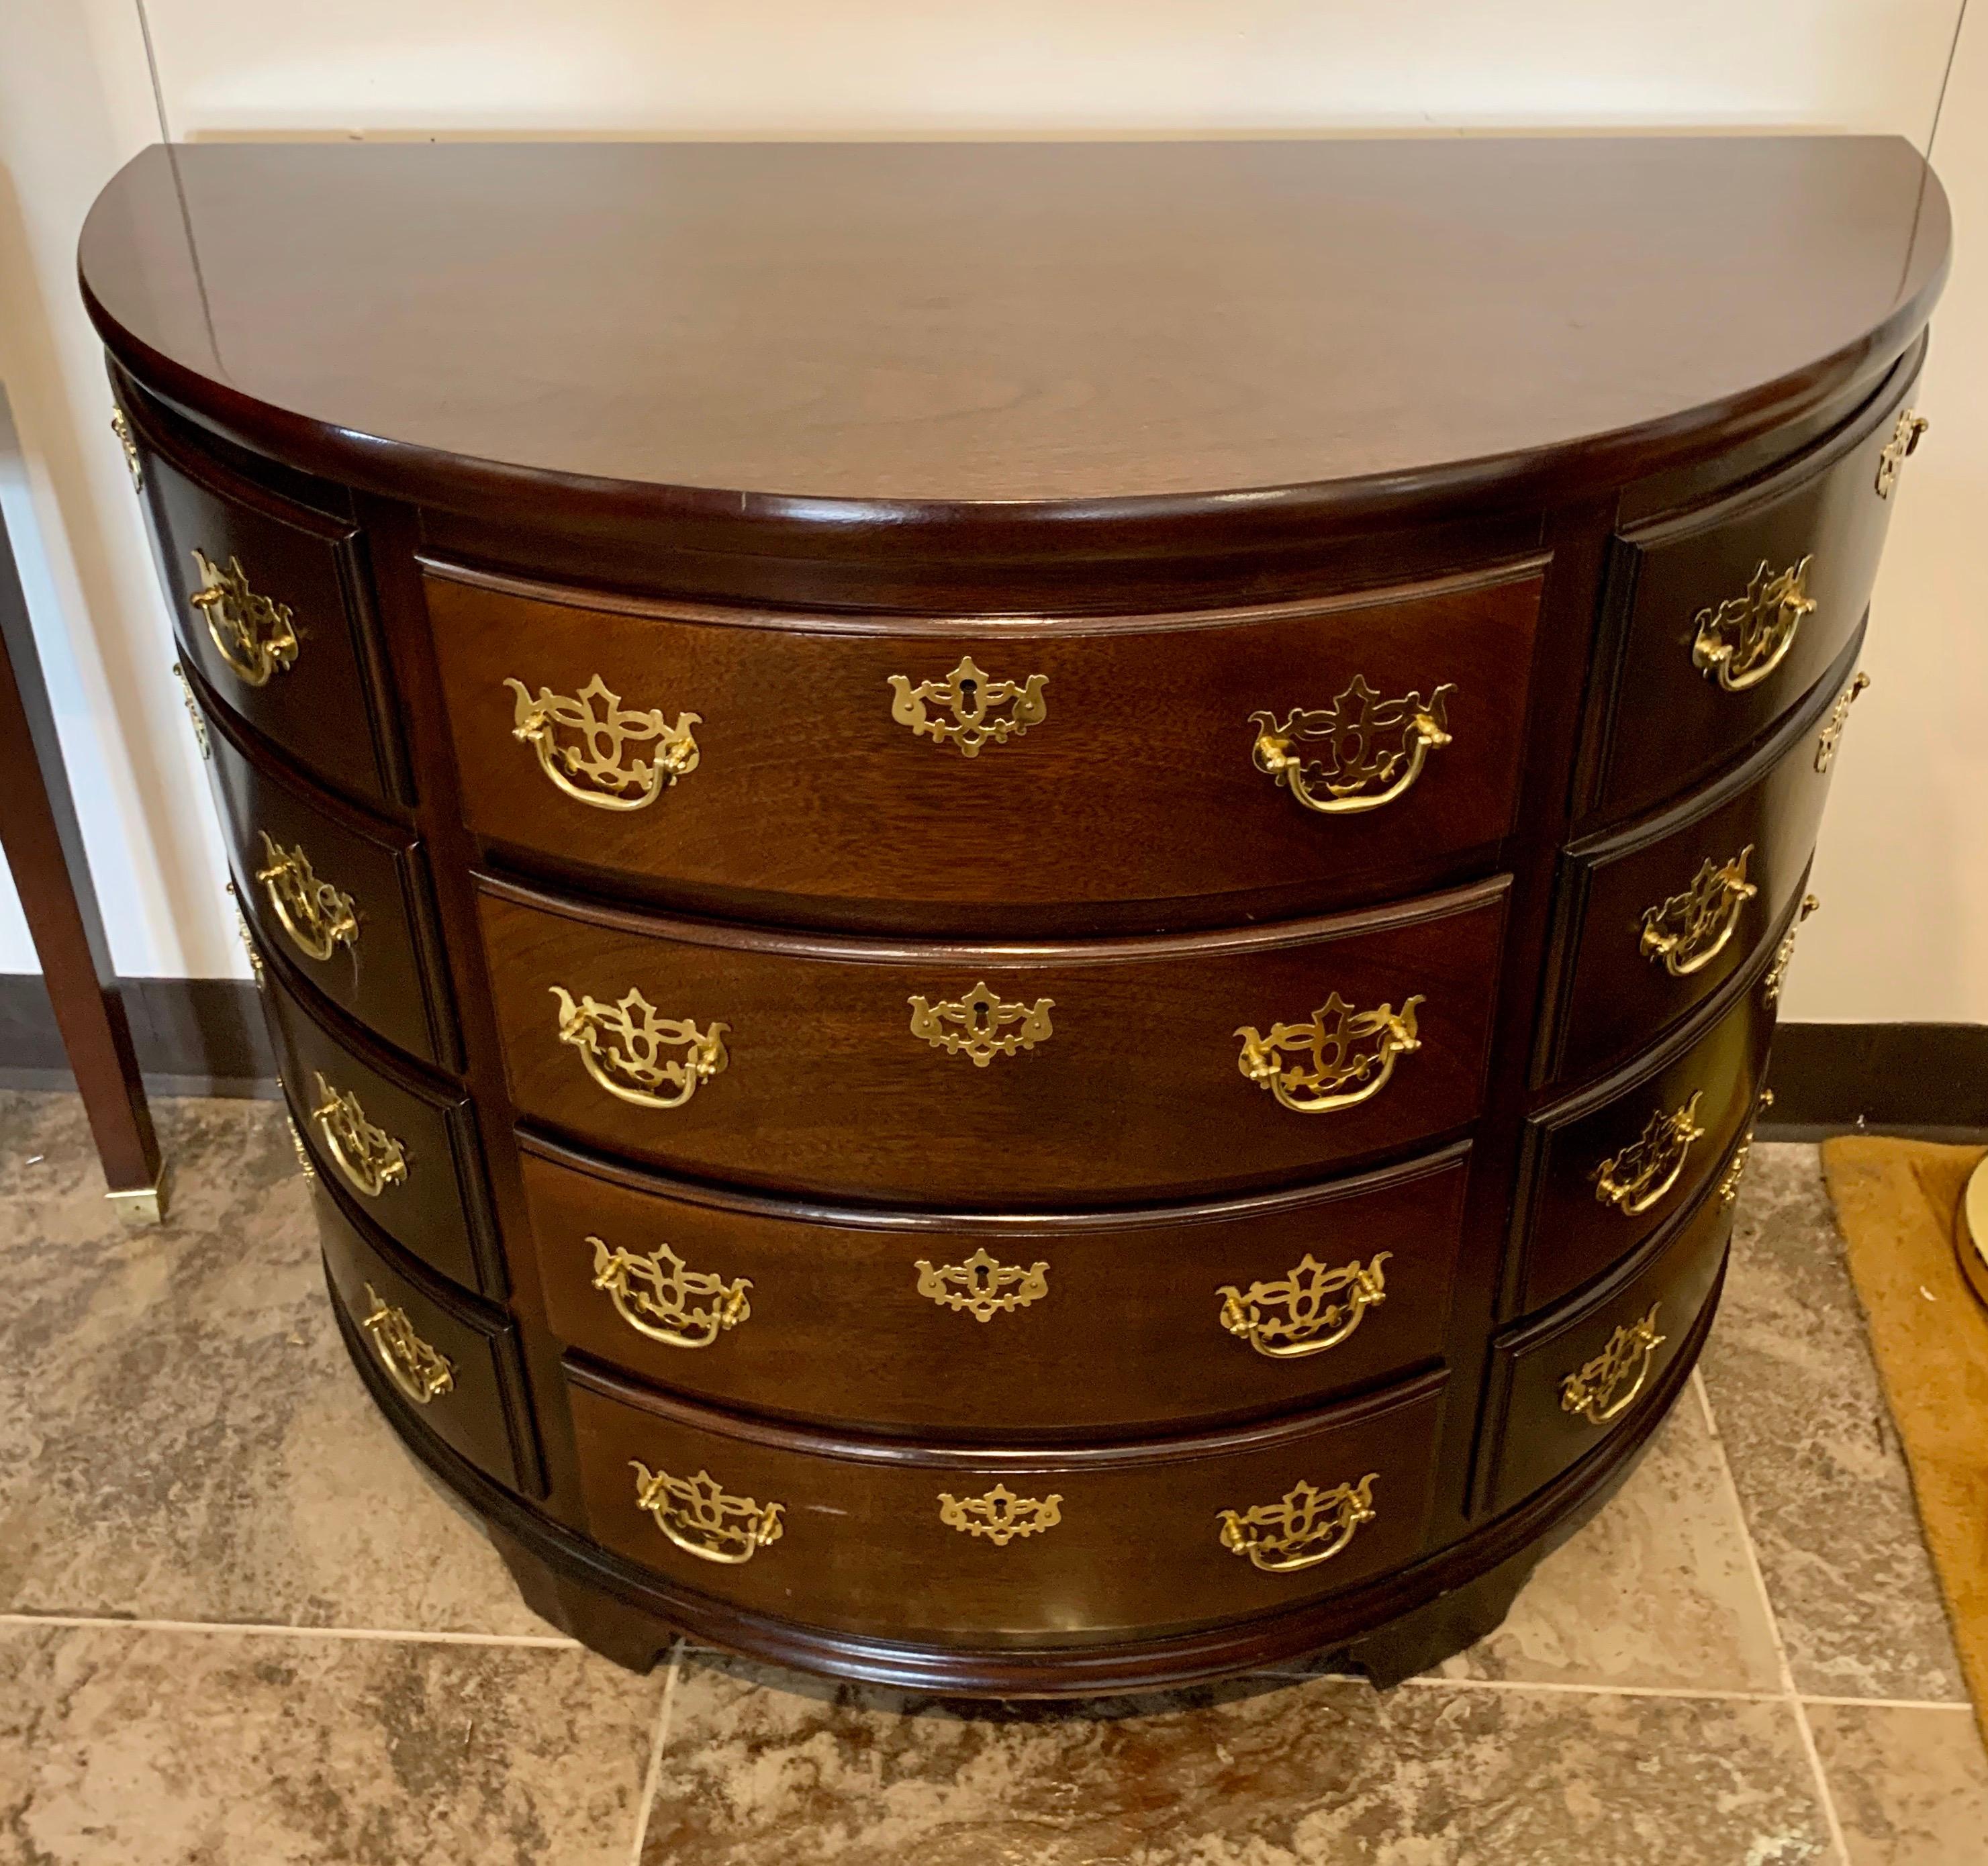 Stunning mahogany demilune chest of drawers with ornate brass hardware. There are four functional drawers and eight faux drawers in all. All dimensions are below. Would make an elegant addition to any room.